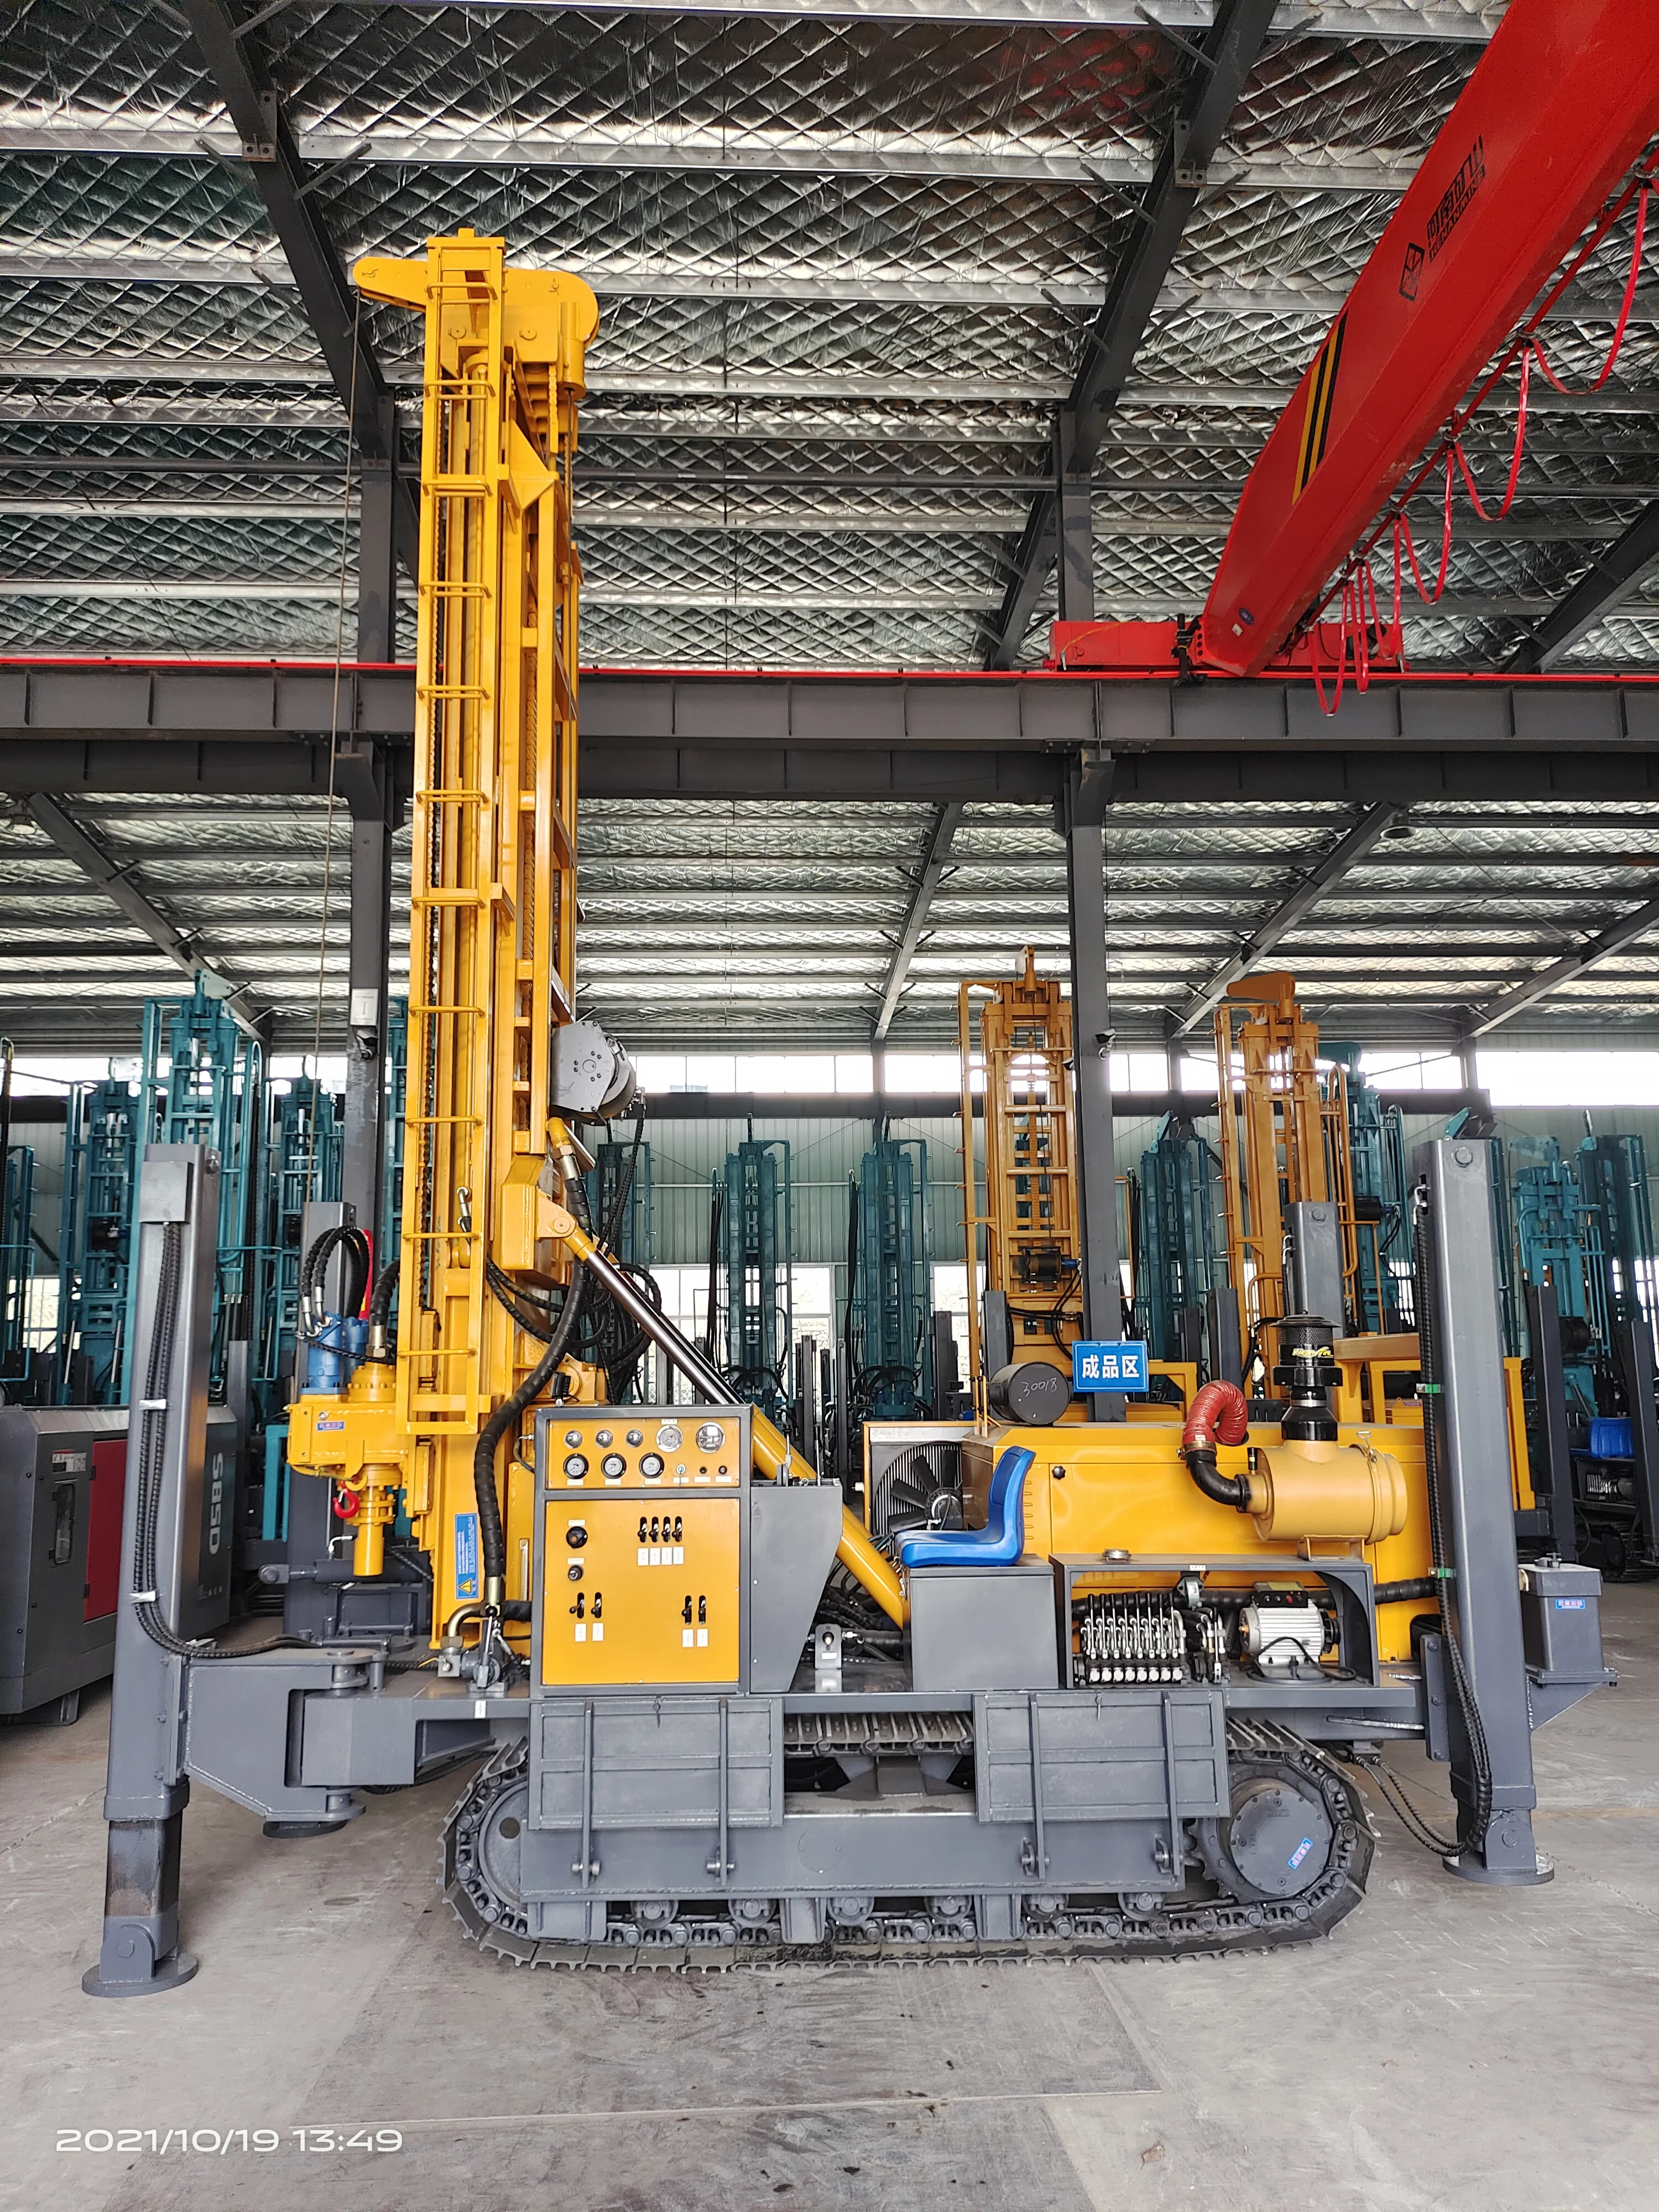 Hongwuhuan HWH500 Deep farm borewell drill 500m borehole water well drilling rigs machines equipment for water well